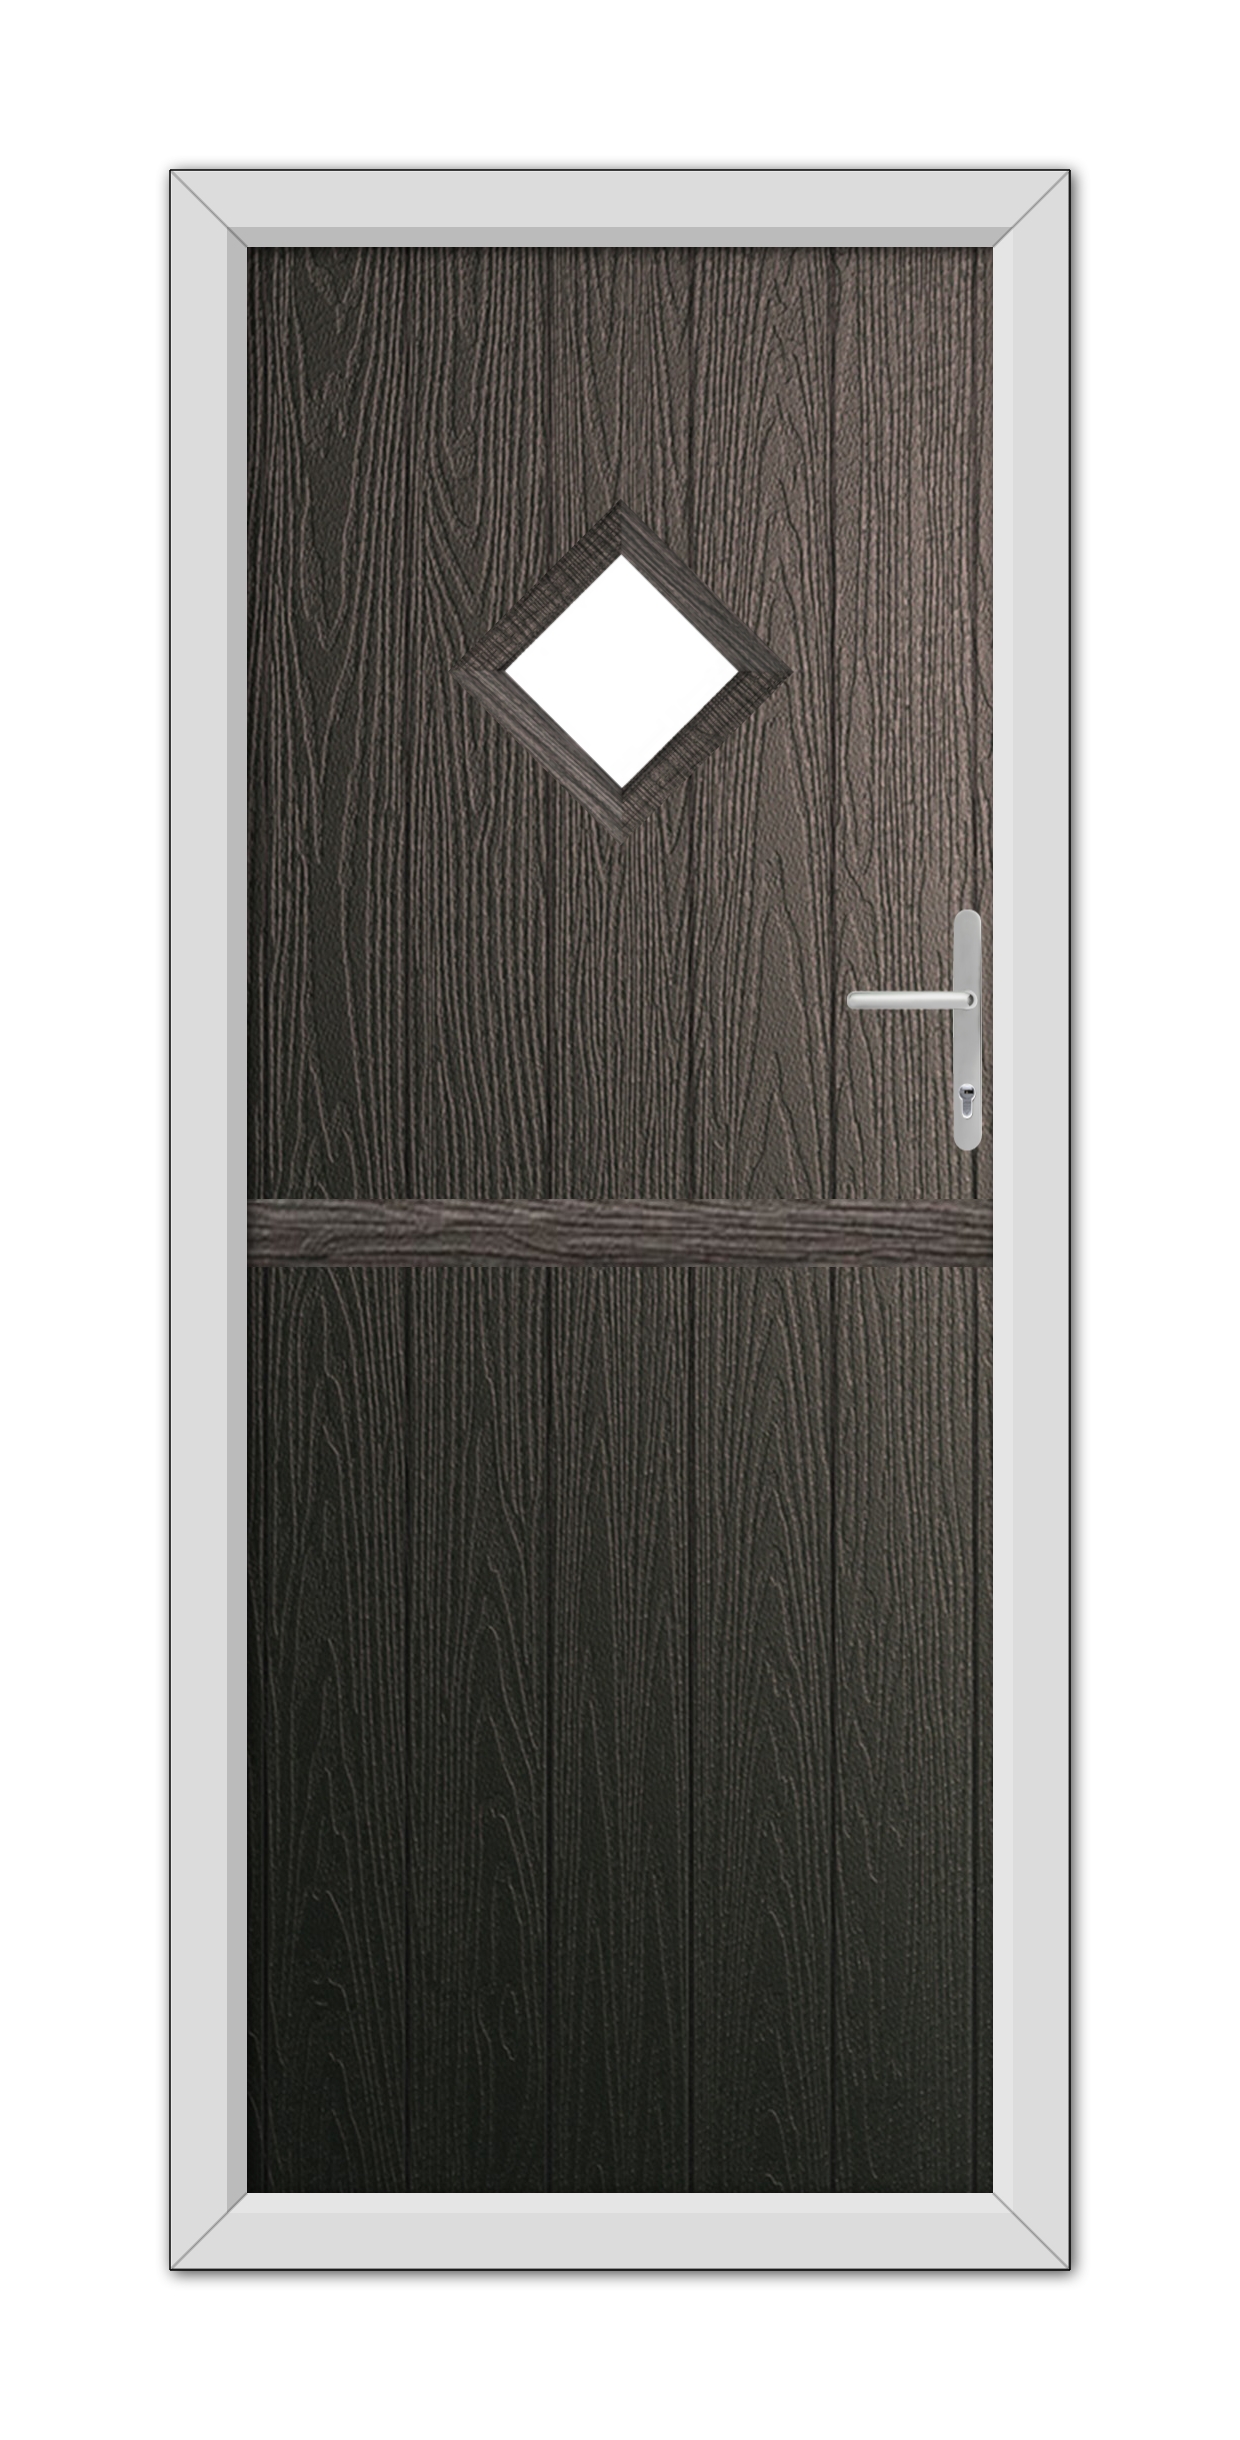 A modern Schwarzbraun Cornwall Stable Composite Door 48mm Timber Core with a diamond-shaped window and a silver handle, set in a white frame.